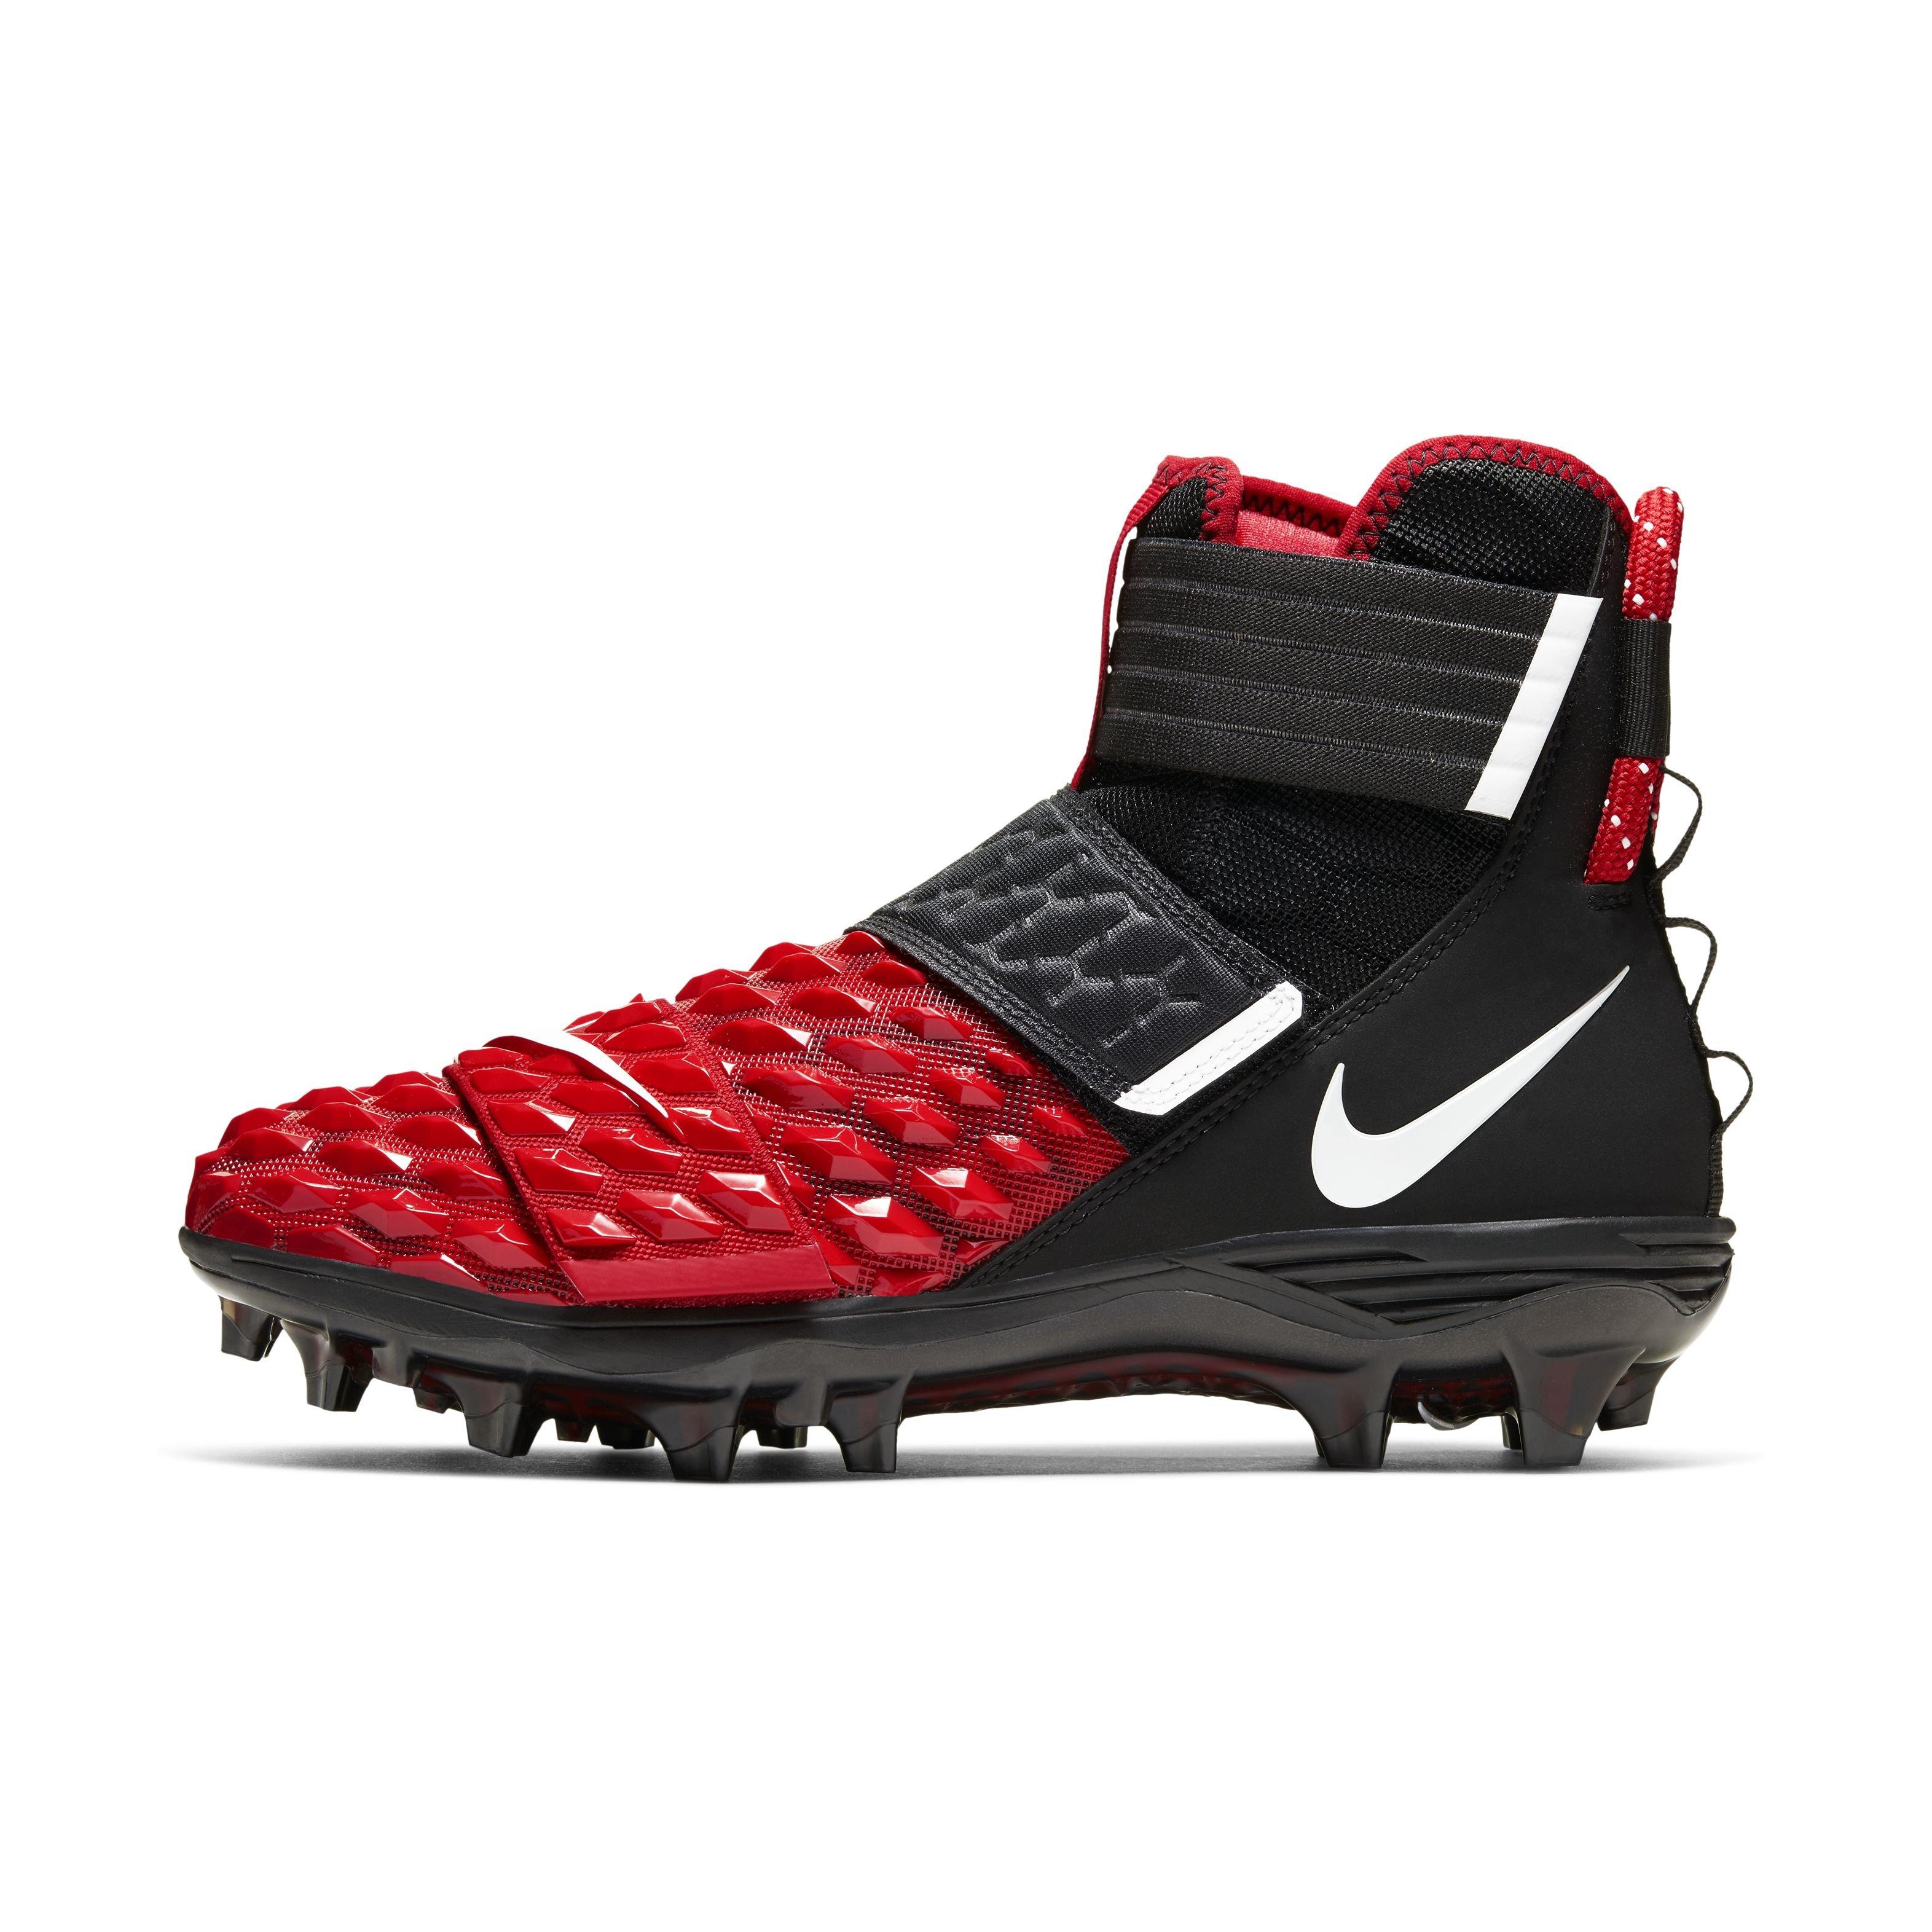 red and white nike cleats